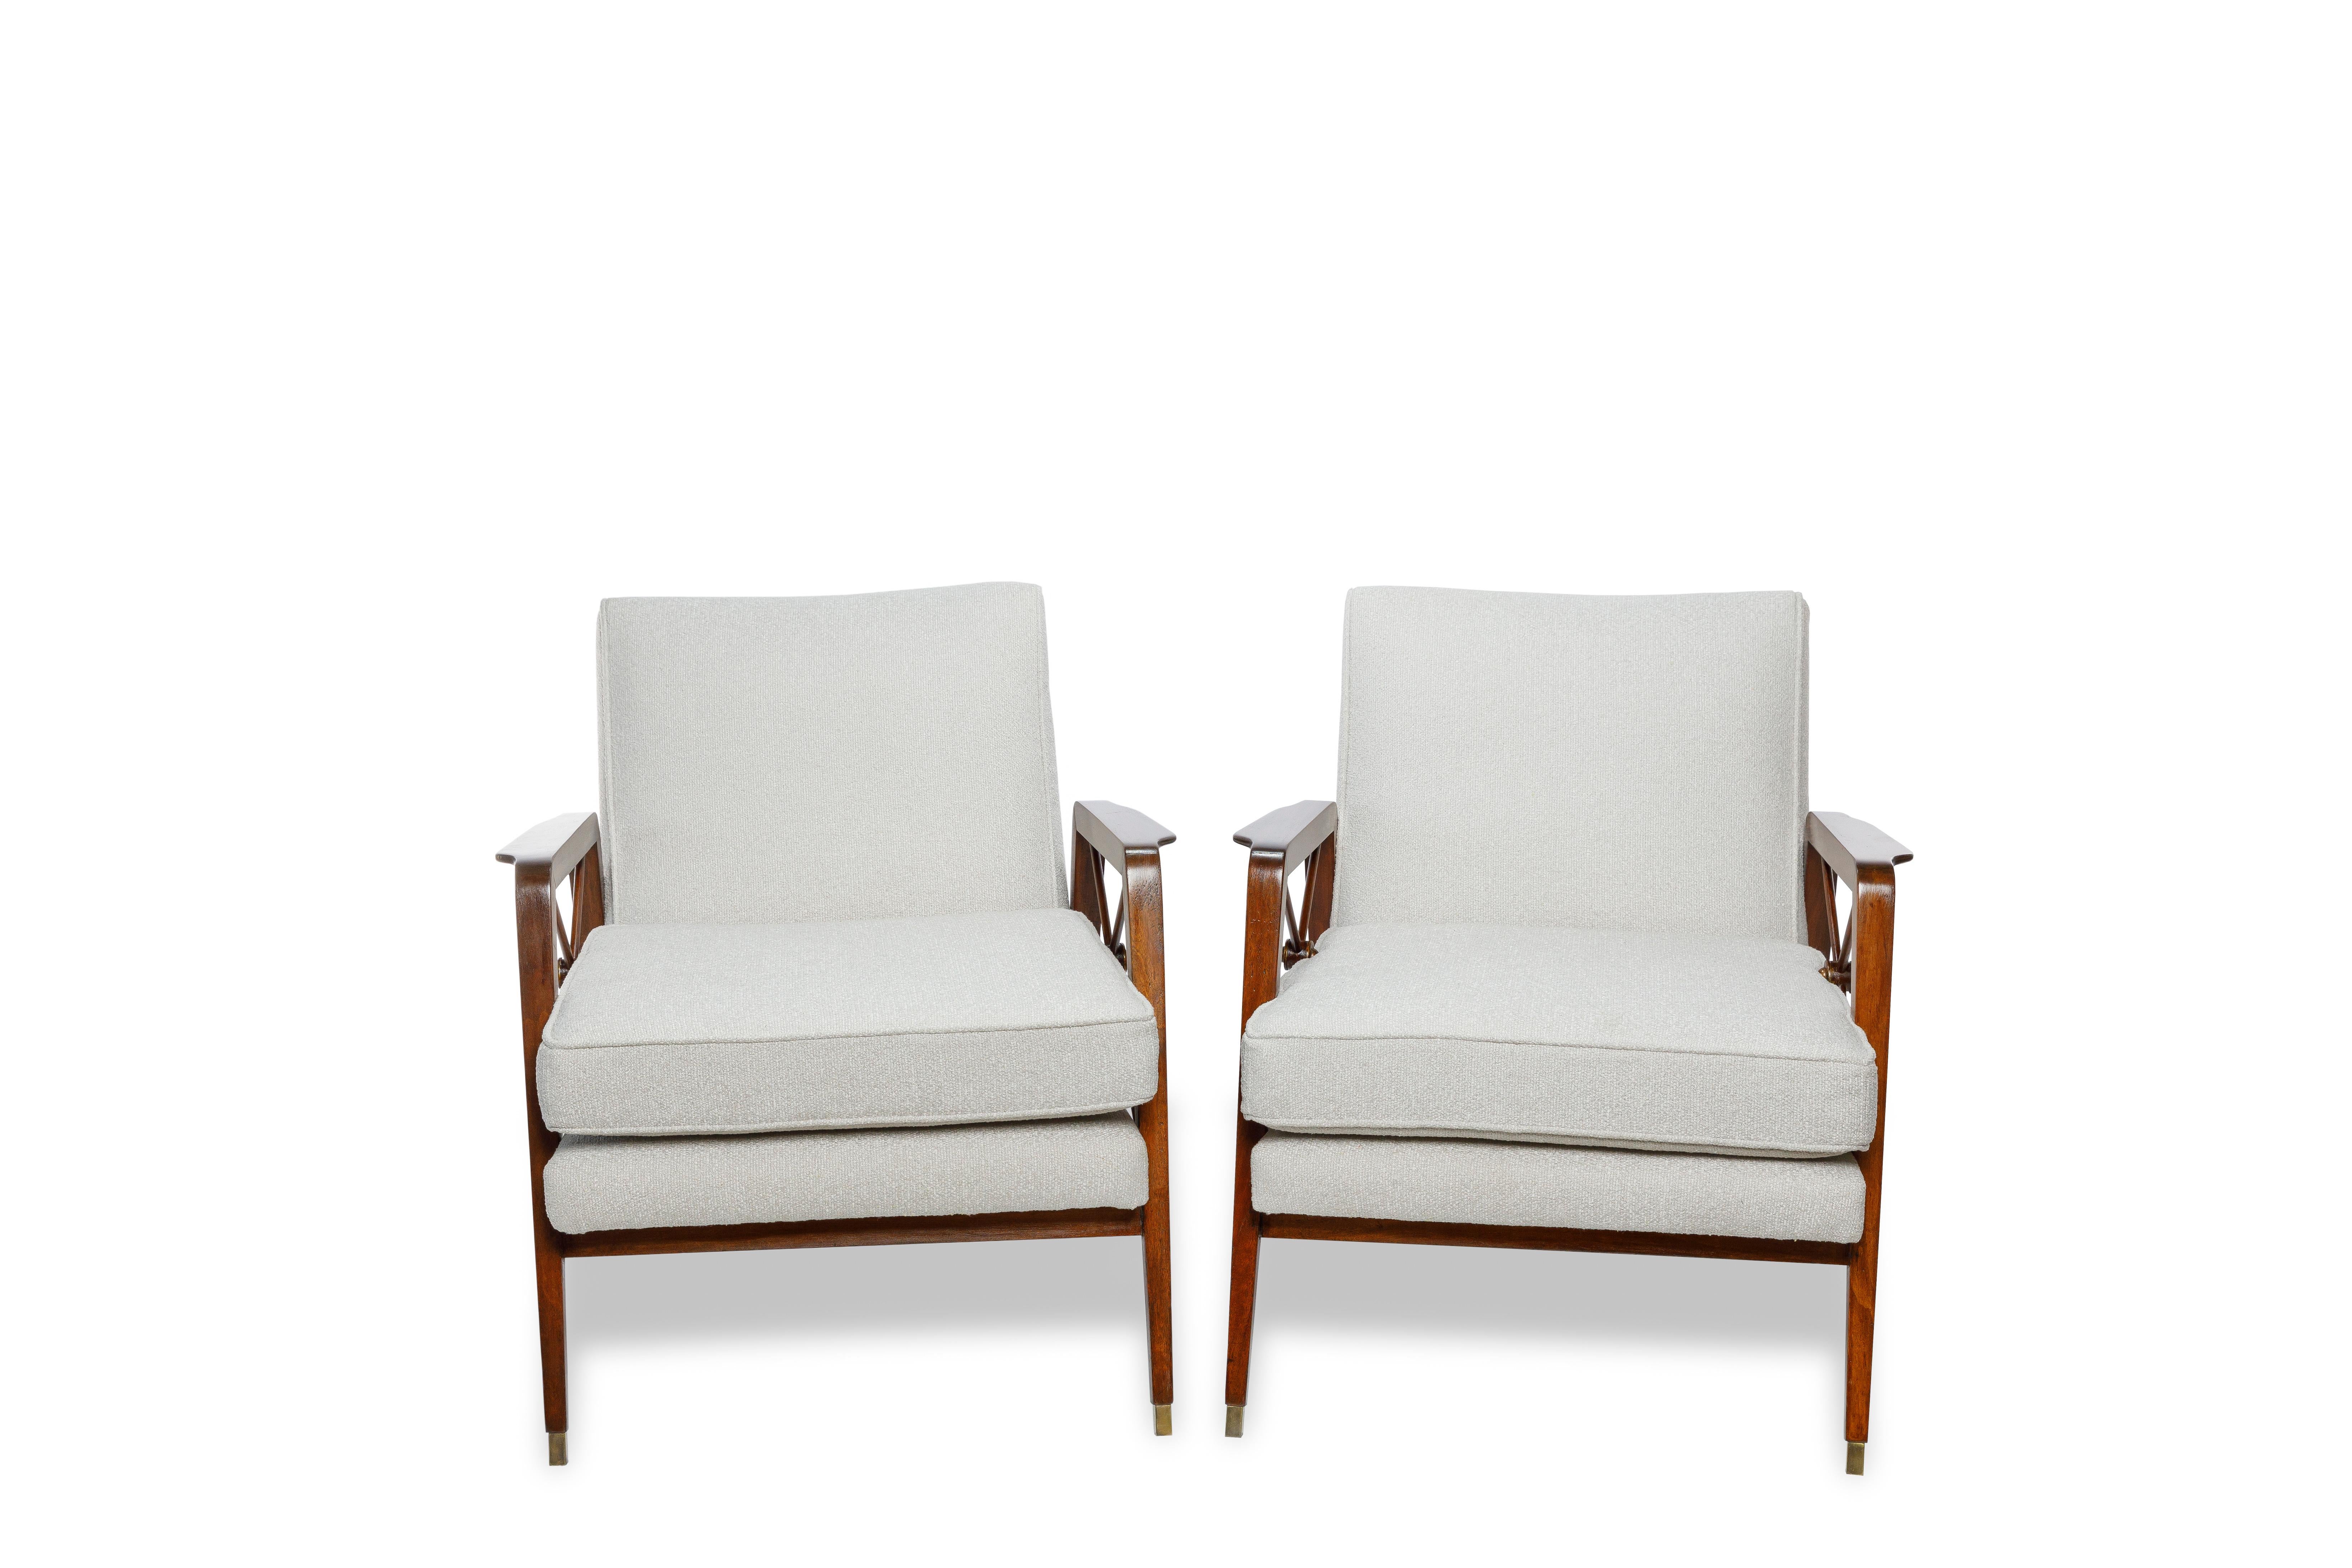 Pair of Mid-Century Modern Armchairs manufactured in Brazil in the 1960s by Móveis Cavallaro. 
Structured in wood and upholstered in fabric, it has the tip of the chair's feet in metal.